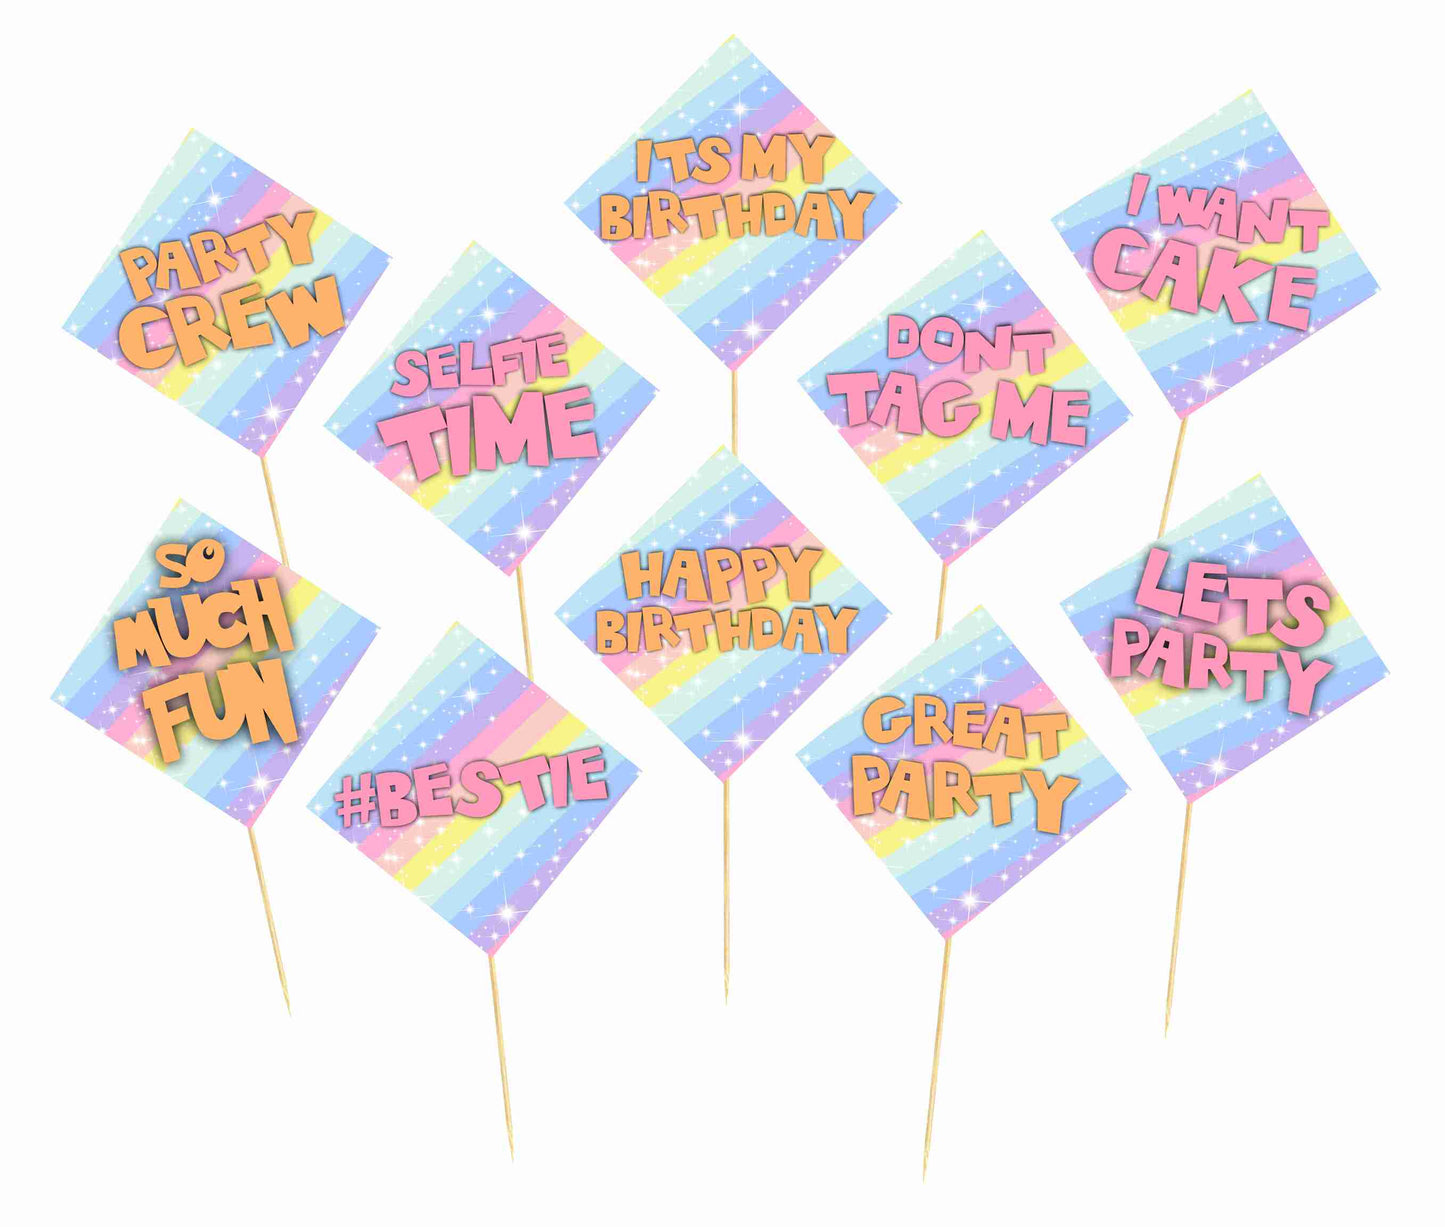 Pastel Colors Birthday Photo Booth Party Props Theme Birthday Party Decoration, Birthday Photo Booth Party Item for Adults and Kids